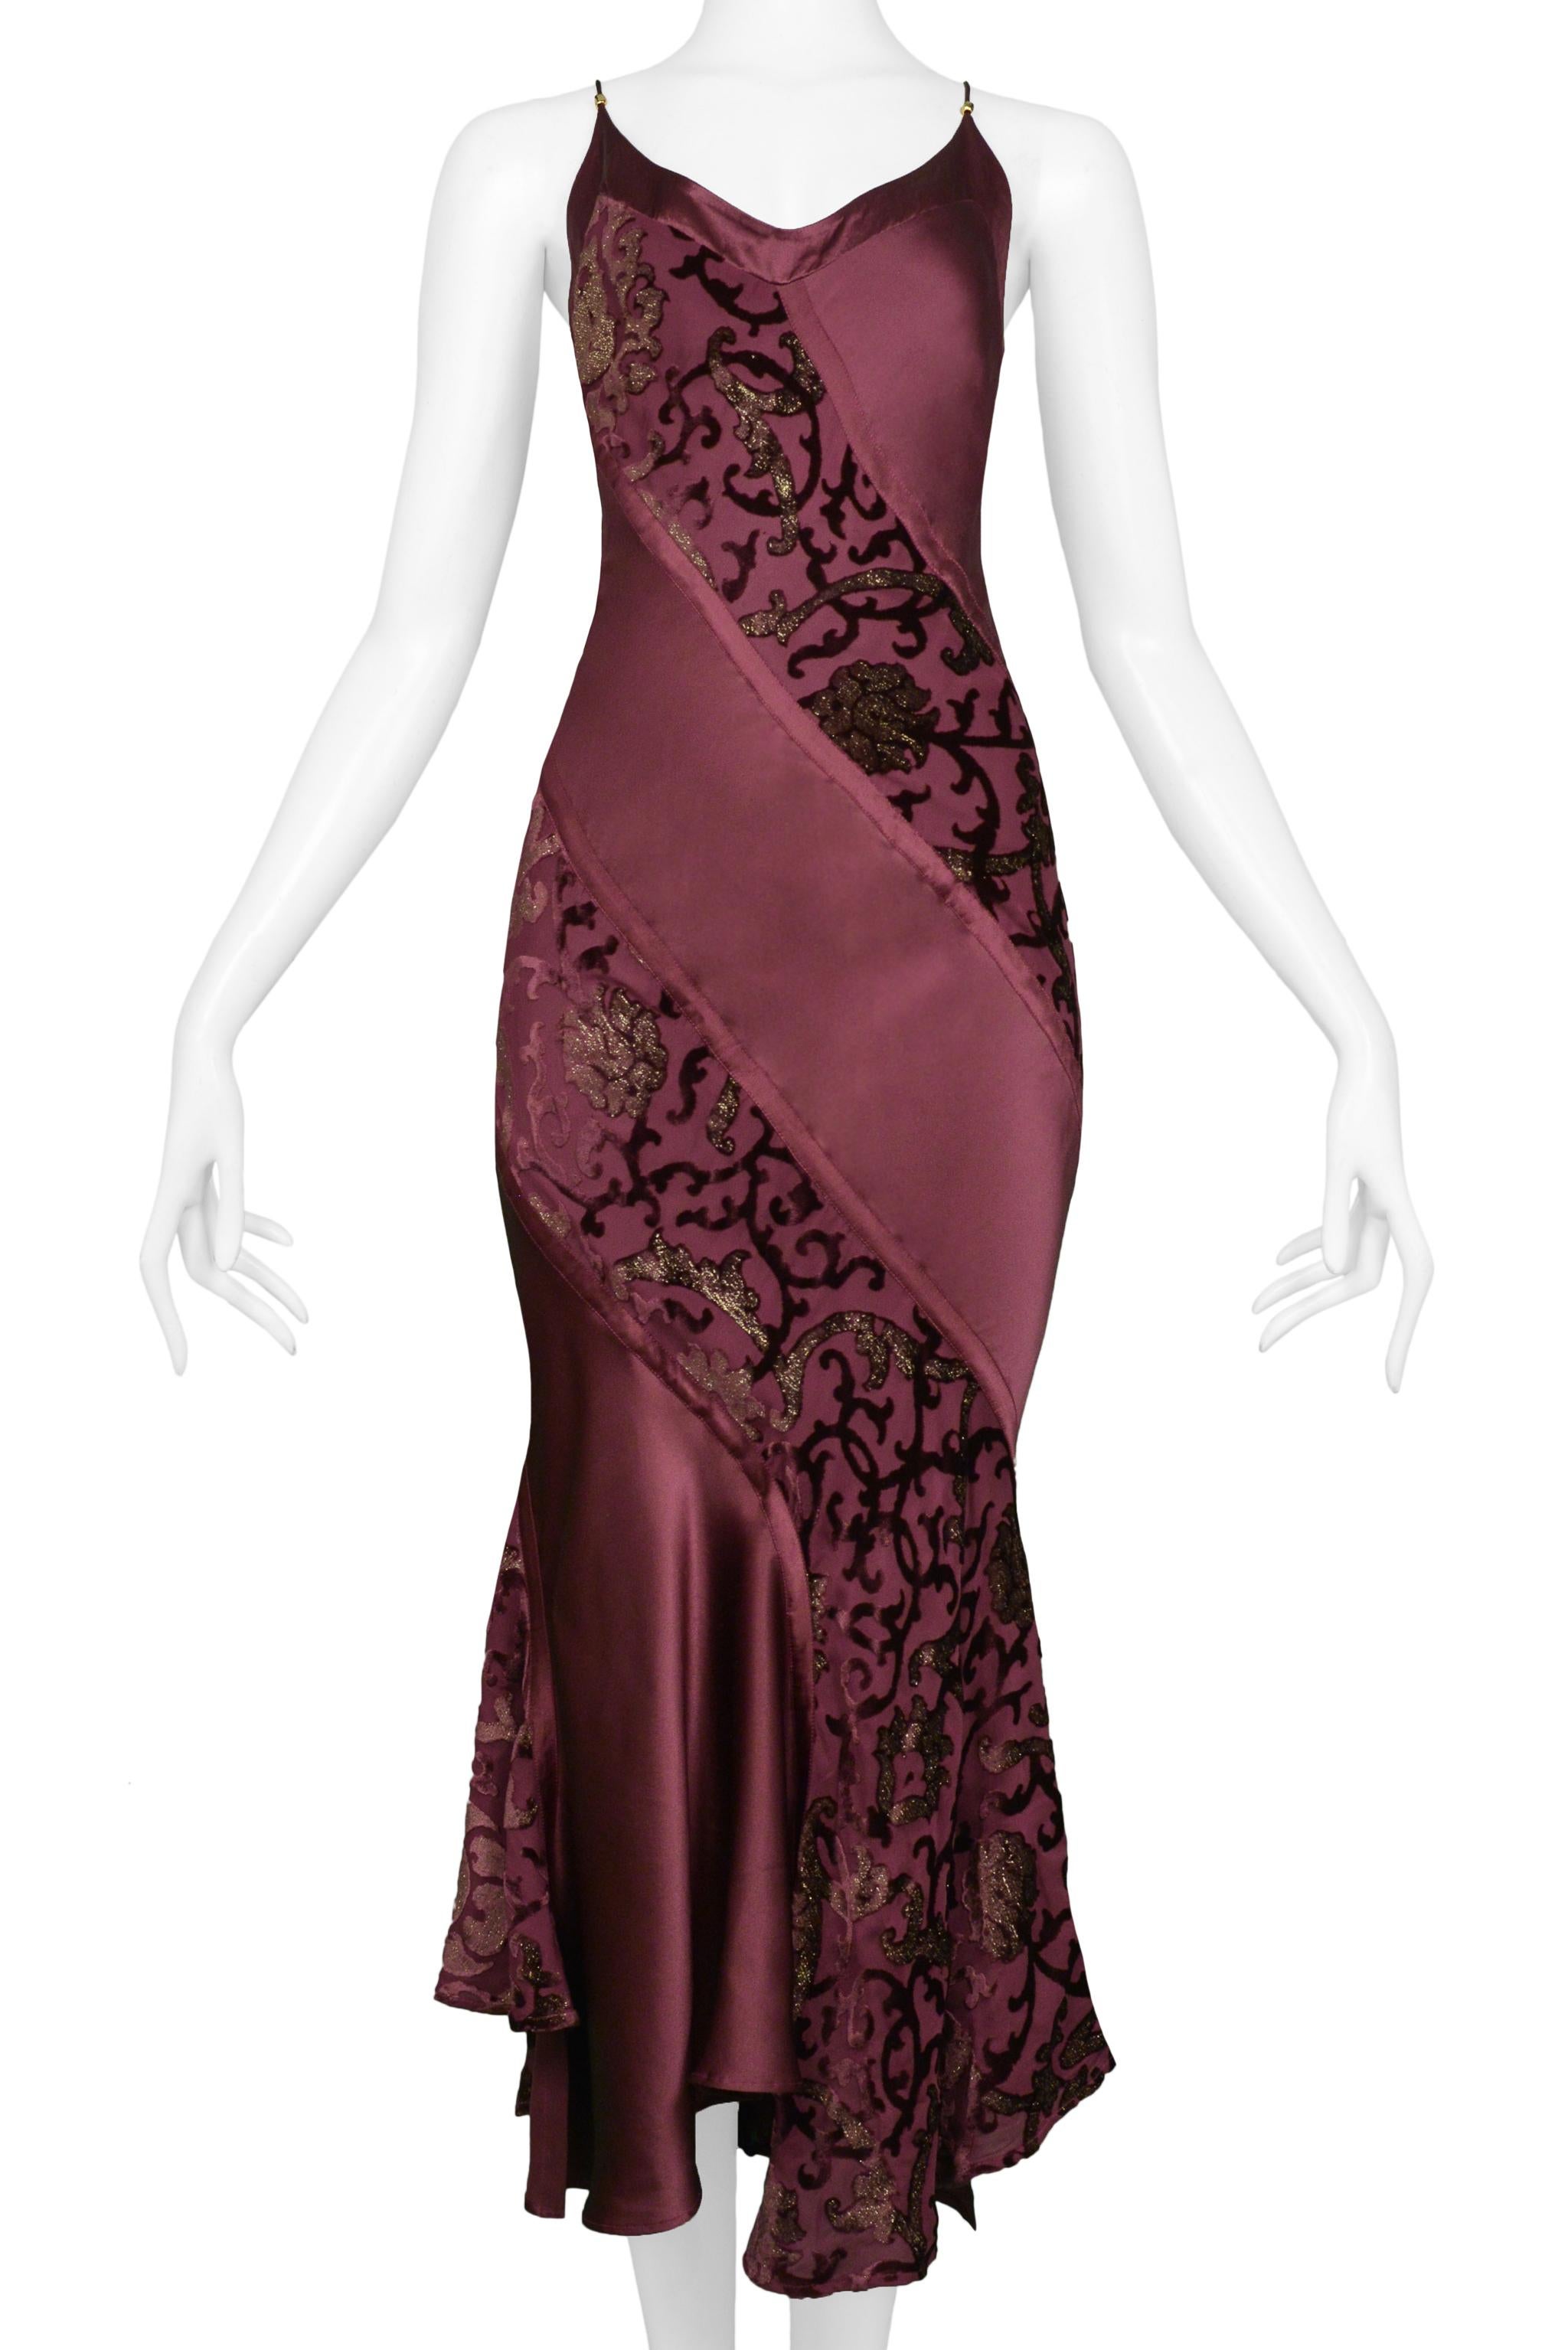 Resurrection Vintage is excited to present a vintage Roberto Cavalli burgundy slip dress with a decorative floral flocking print featuring thin straps, a slip dress style bodice, and a flared hem. 

Roberto Cavalli
Size: Small
Silk and